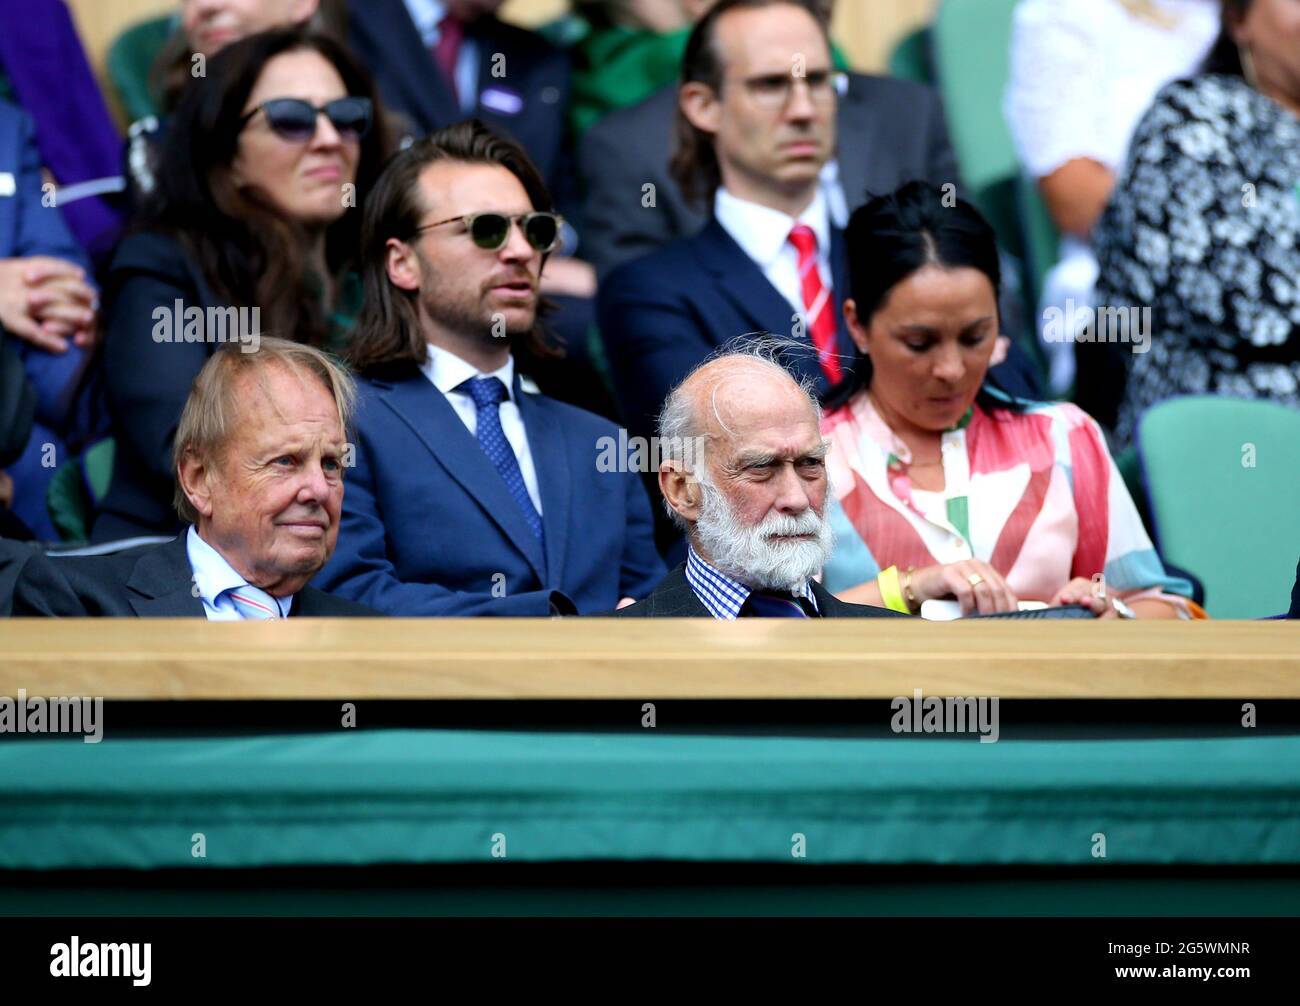 Prince Michael of Kent (bottom centre) watches the second round gentlemen's singles match between Novak Djokovic and Kevin Anderson from the Royal Box on centre court on day three of Wimbledon at The All England Lawn Tennis and Croquet Club, Wimbledon. Picture date: Wednesday June 30, 2021. Stock Photo